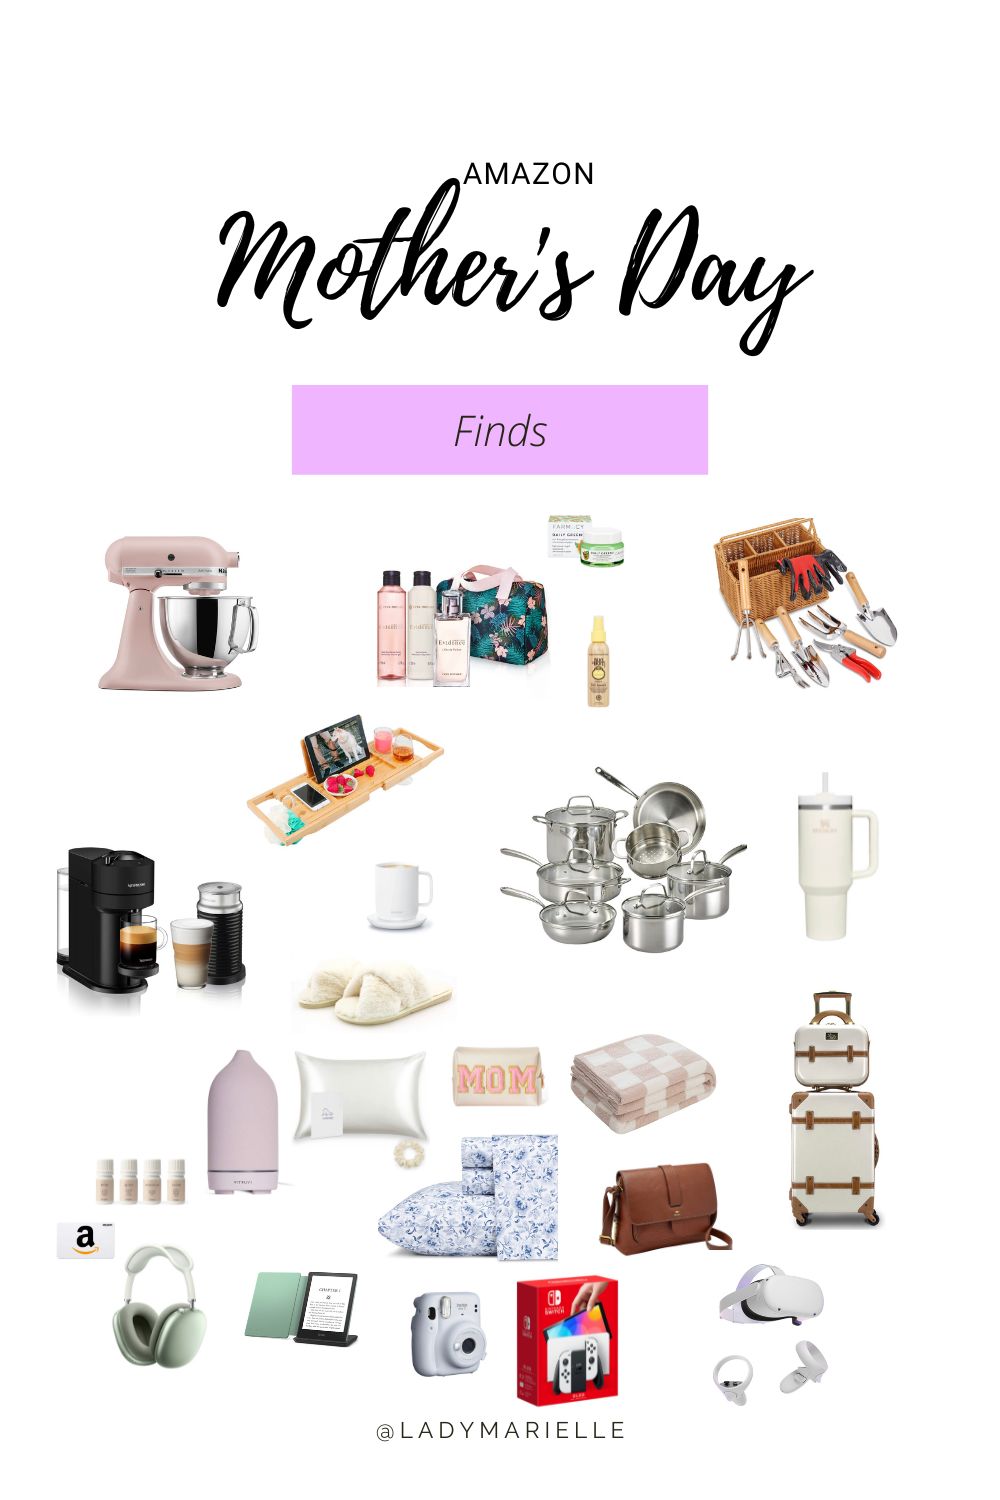 Gifts For Moms